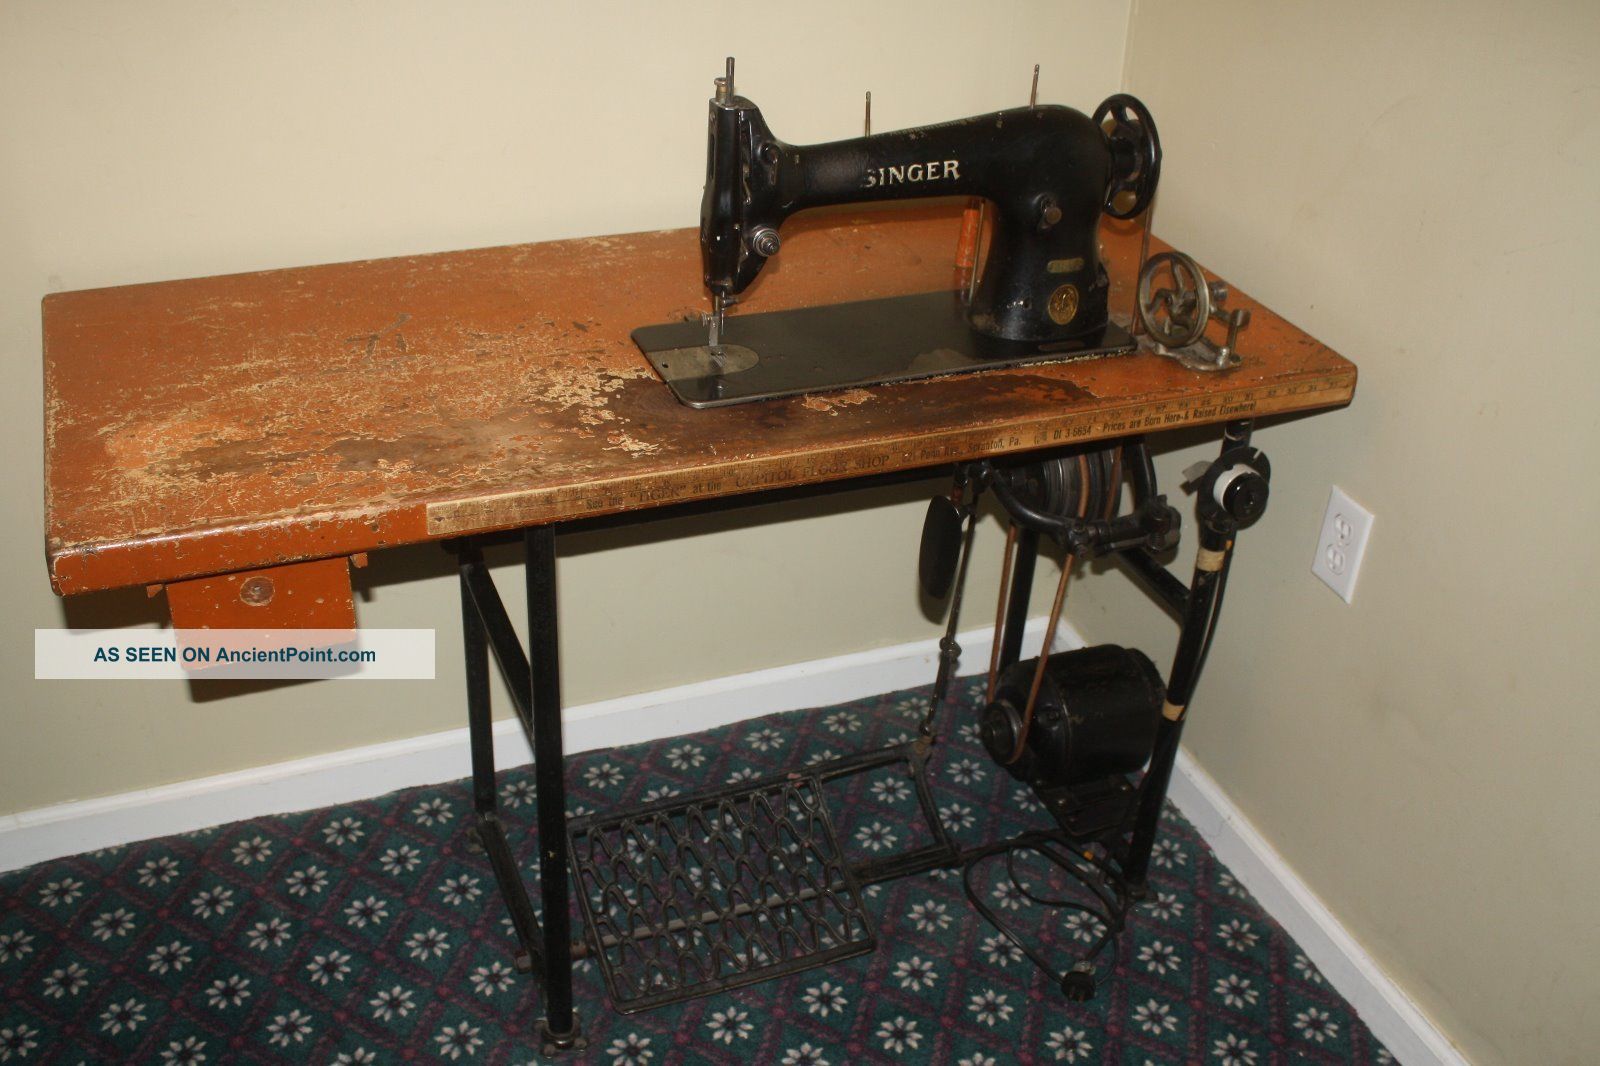 Singer 31 - 15 Industrial Antique Sewing Machine Serial Aa643137 And Sewing Machines photo